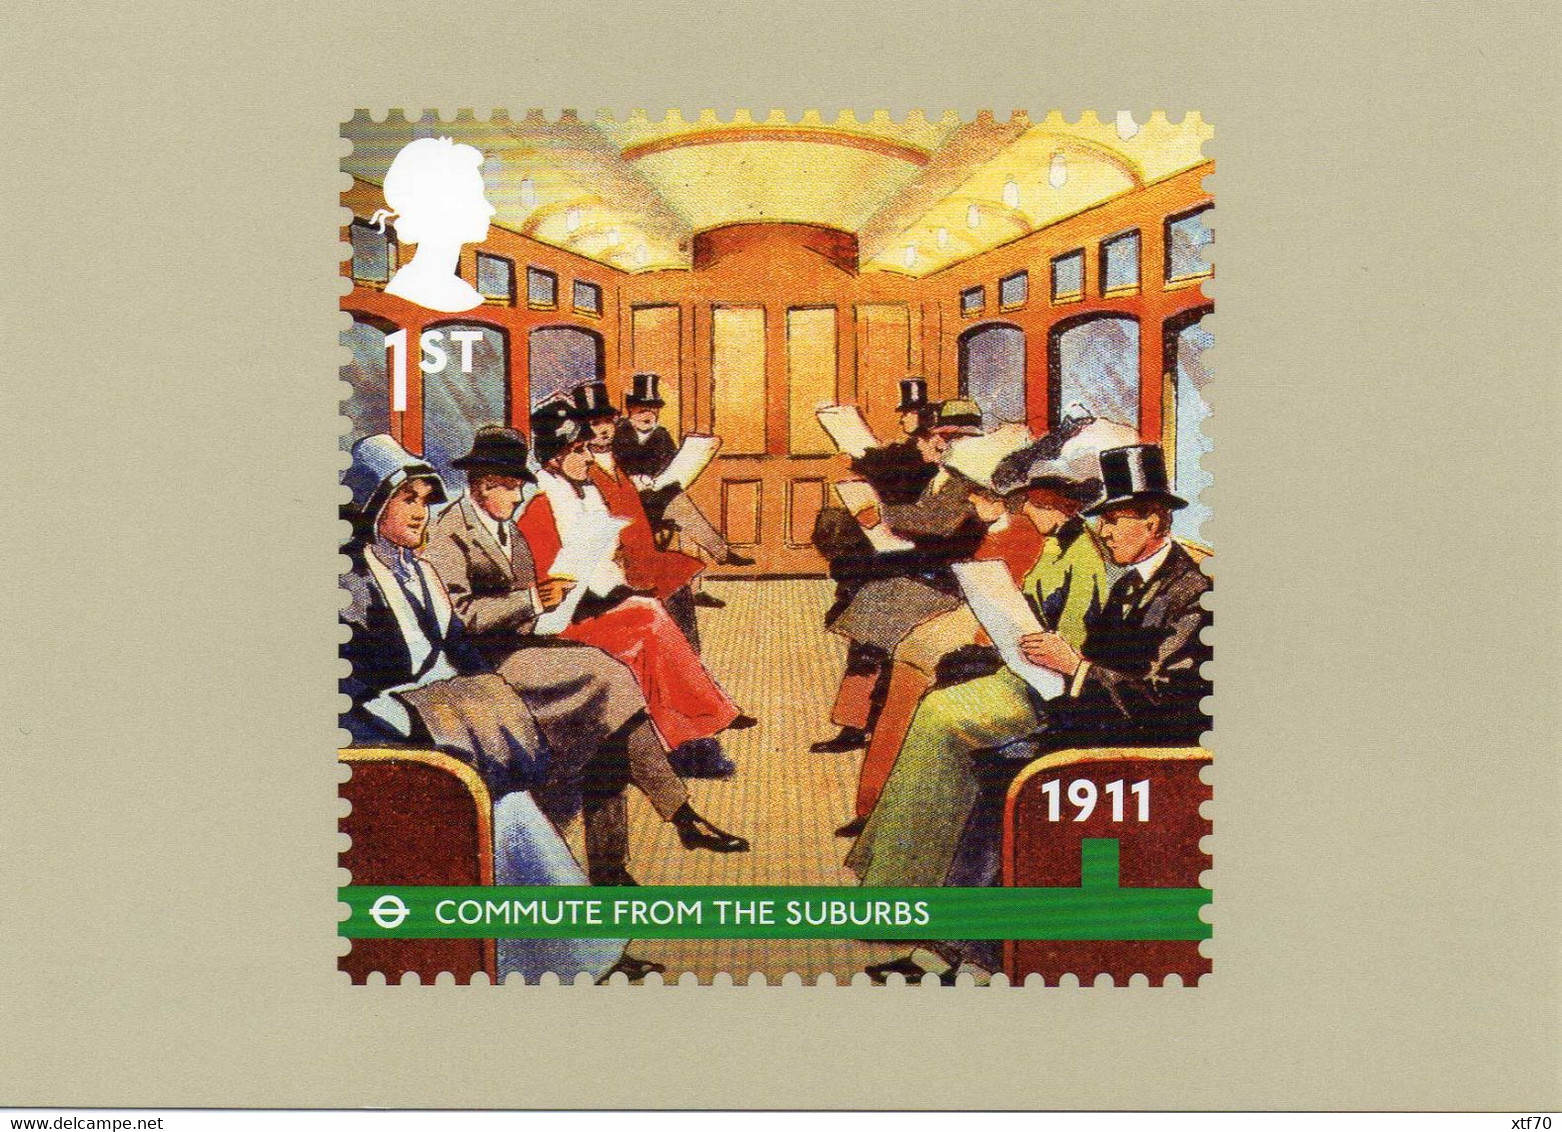 GREAT BRITAIN 2013 150th Anniversary Of The London Underground Mint PHQ Cards - PHQ Cards